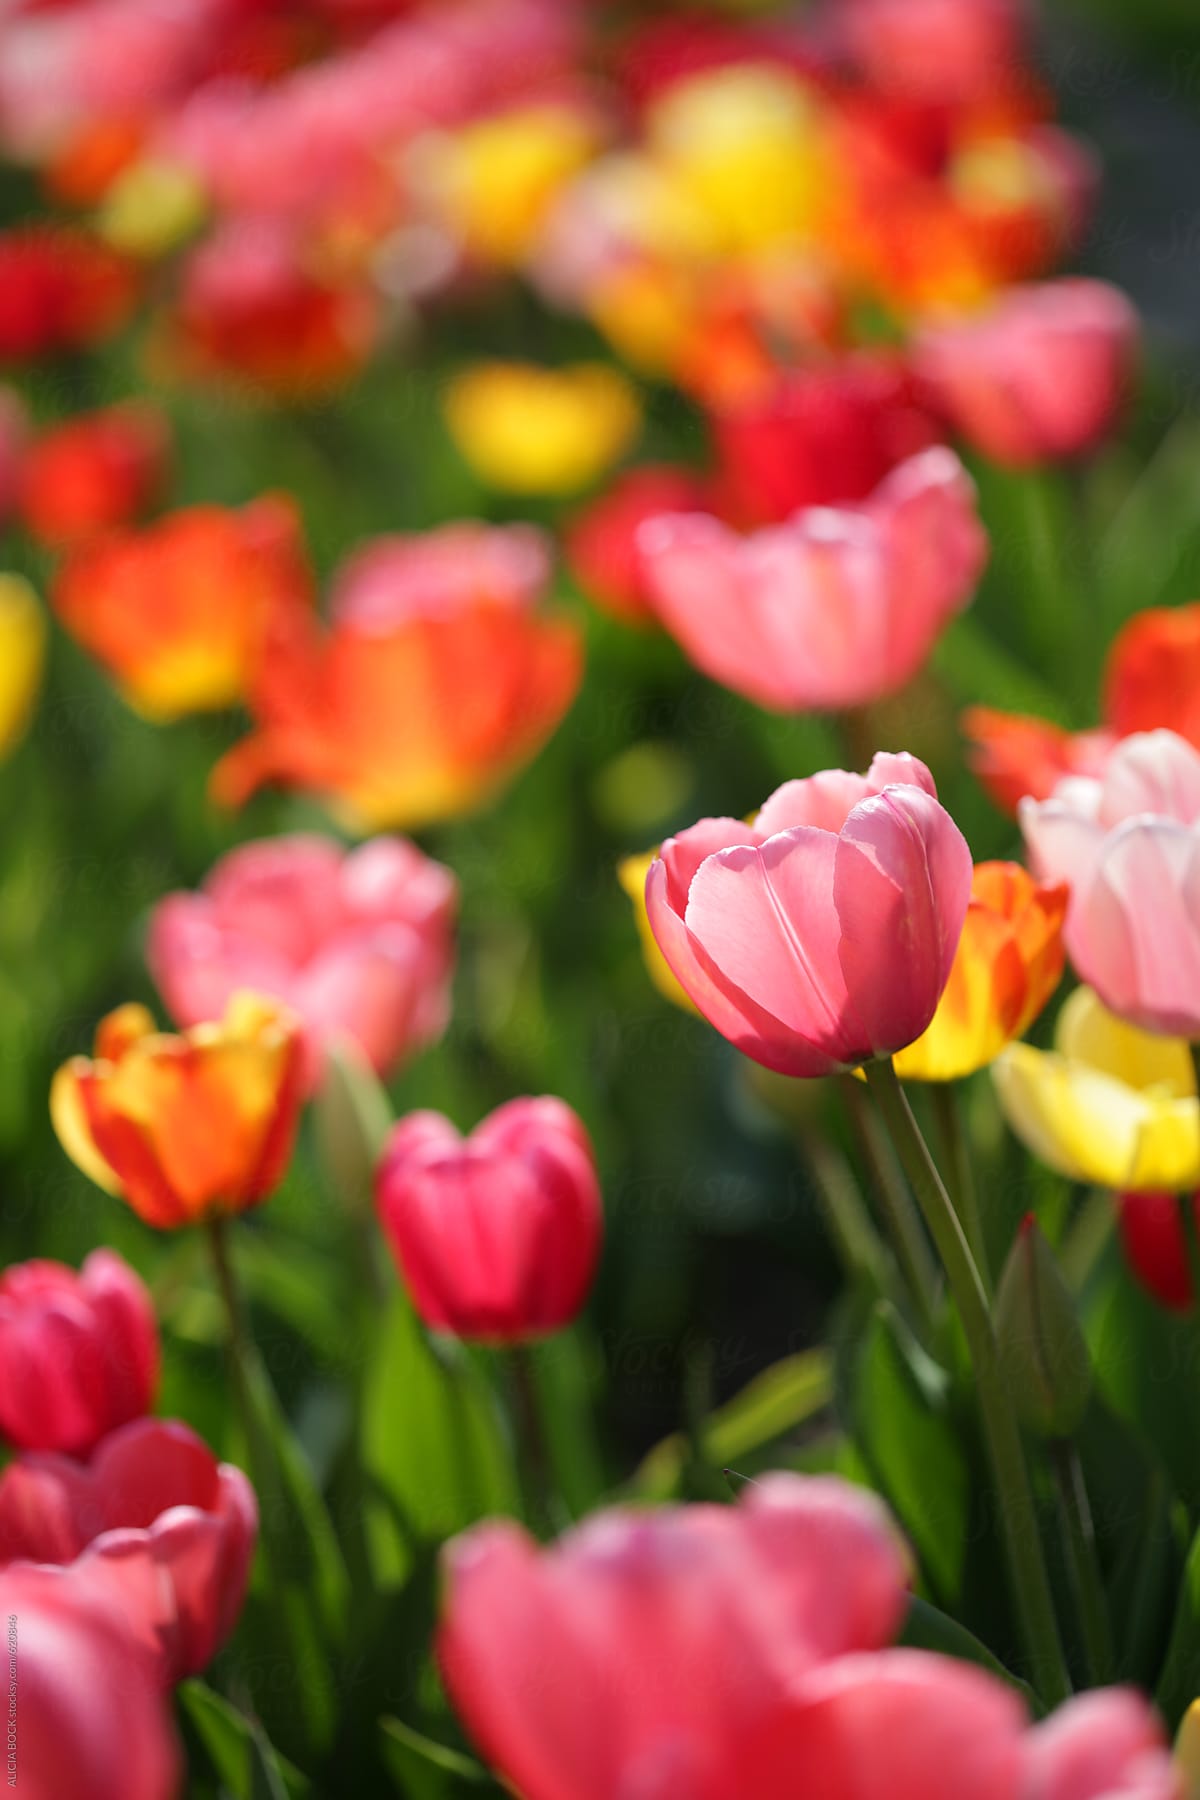 Rainbow Colored Tulips Blooming On A Sunny Morning